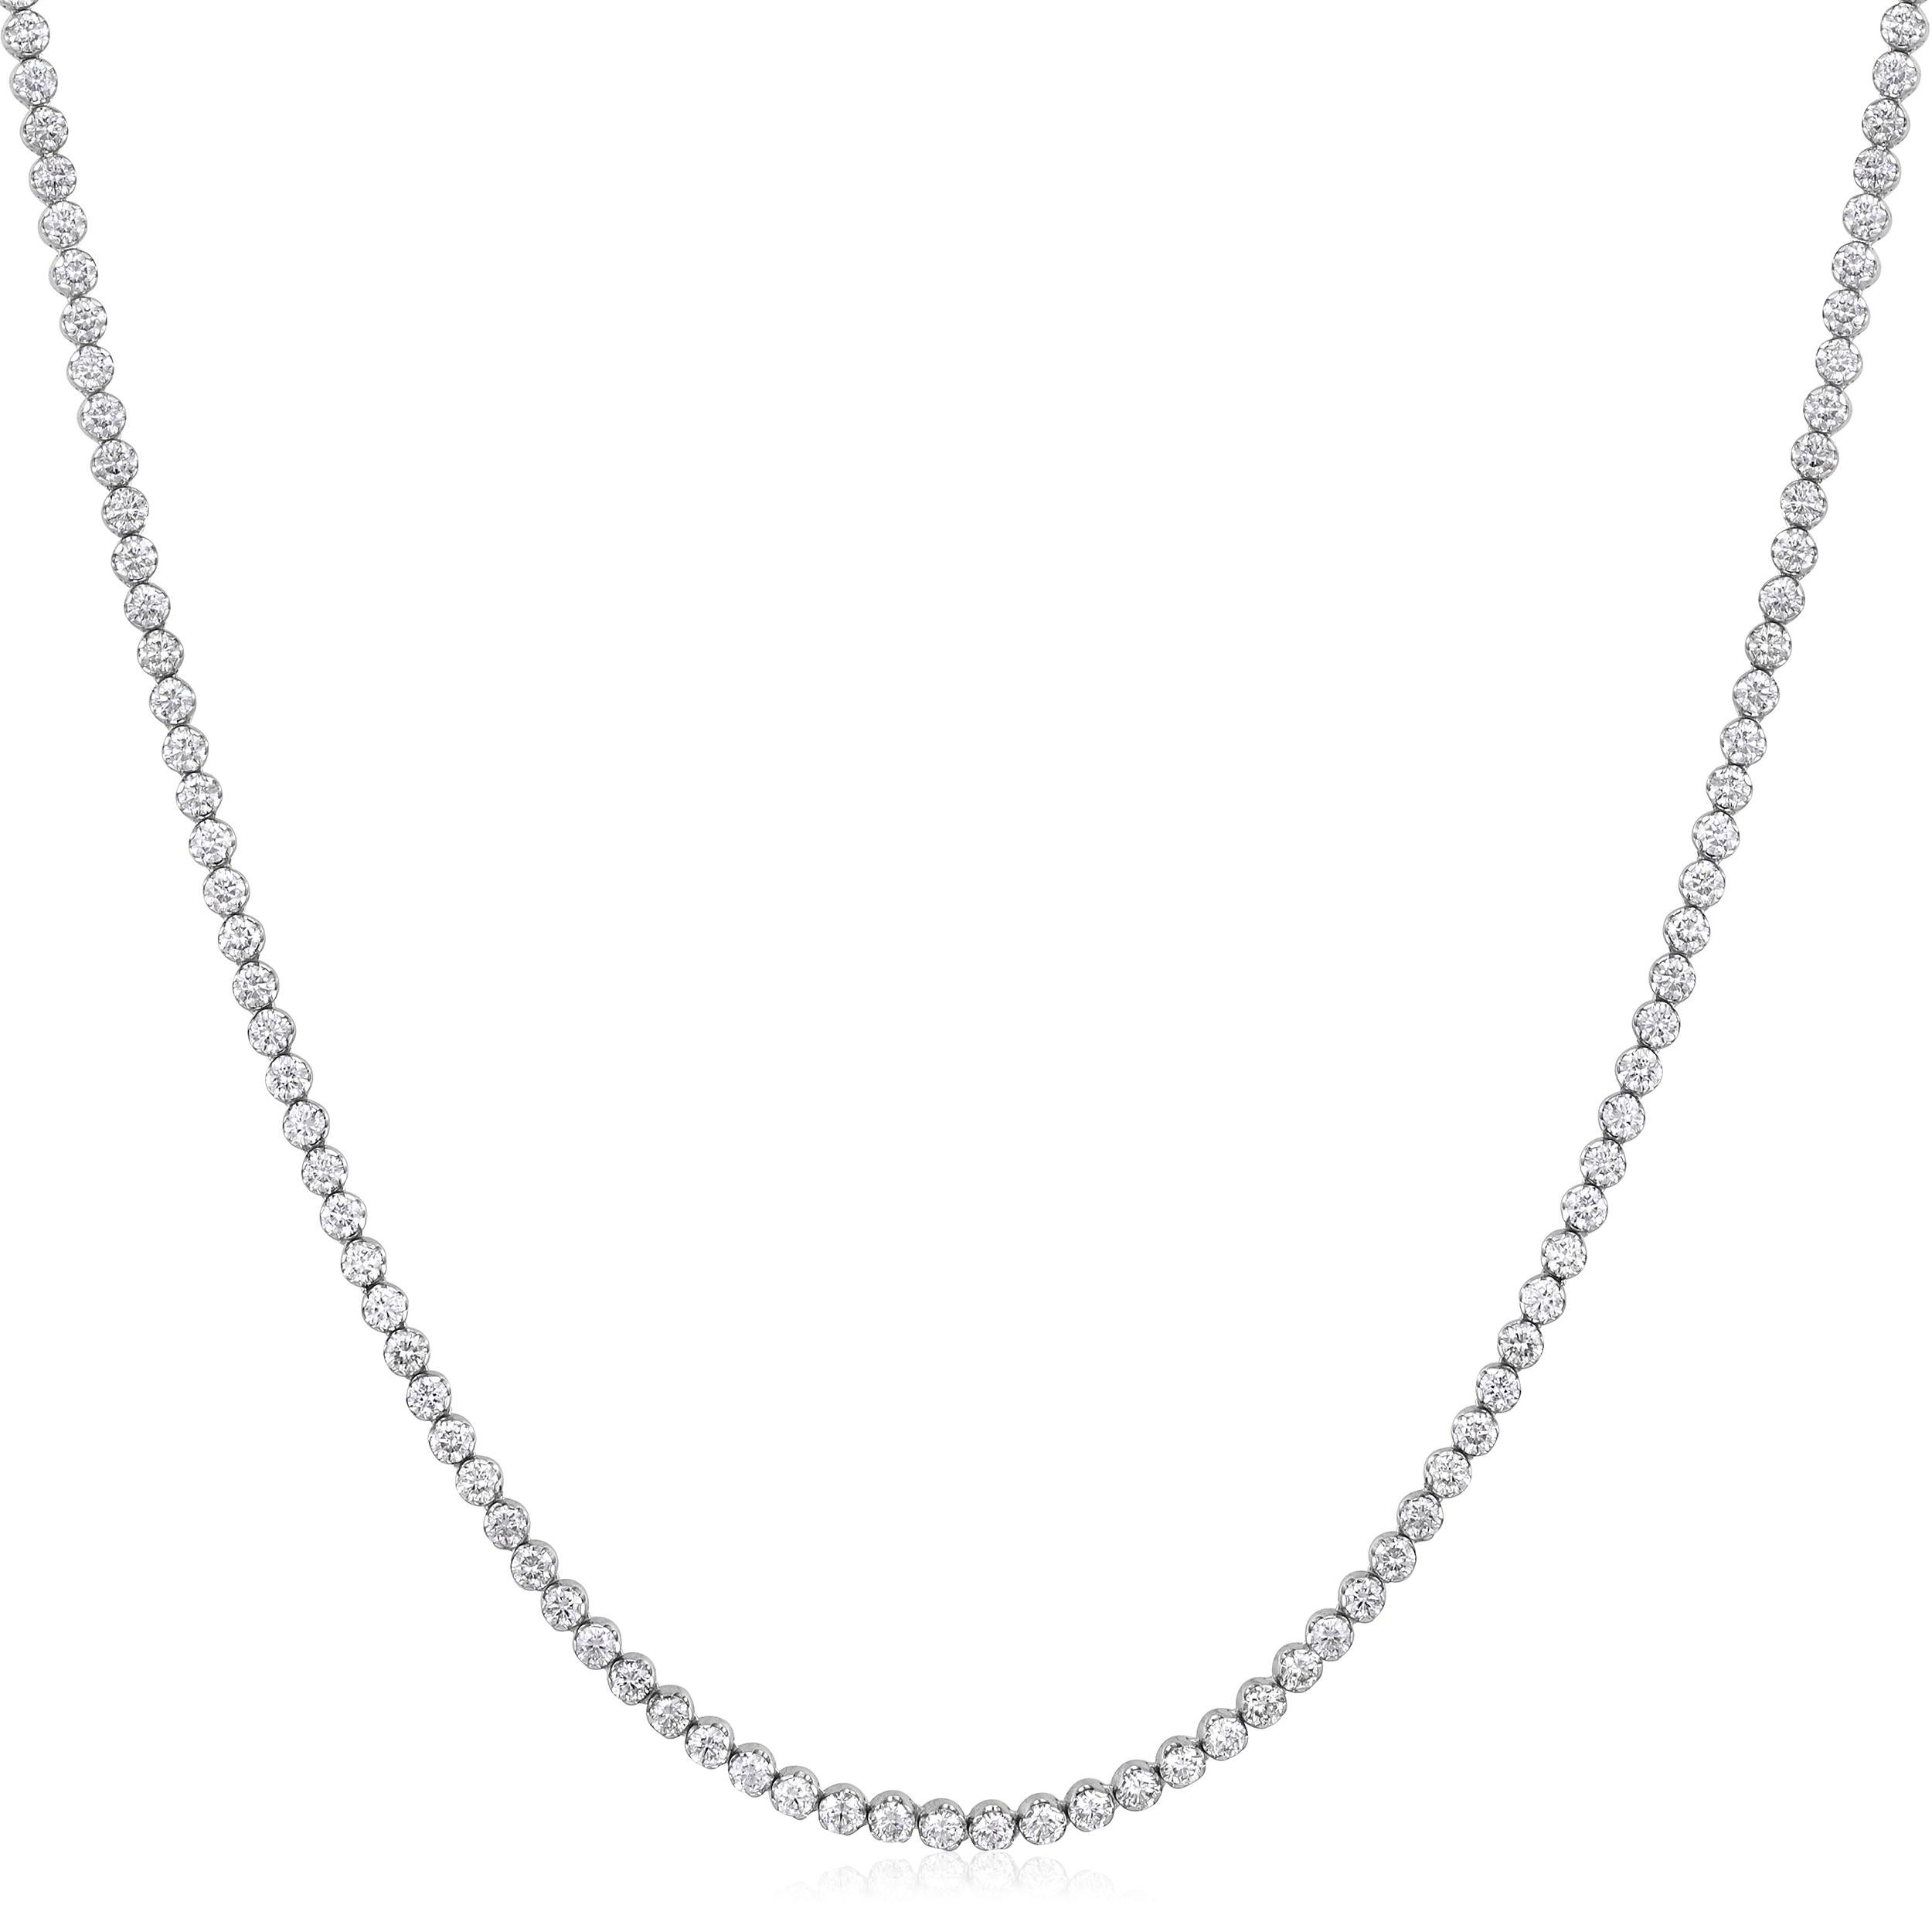 Crafted in 7.52 grams of 14K White Gold, the necklace contains 169 stones of Round Natural Diamonds with a total of 1.73 carat in G-H color and SI clarity. The necklace length is 18 inches..
This jewelry piece will be expertly crafted by our skilled